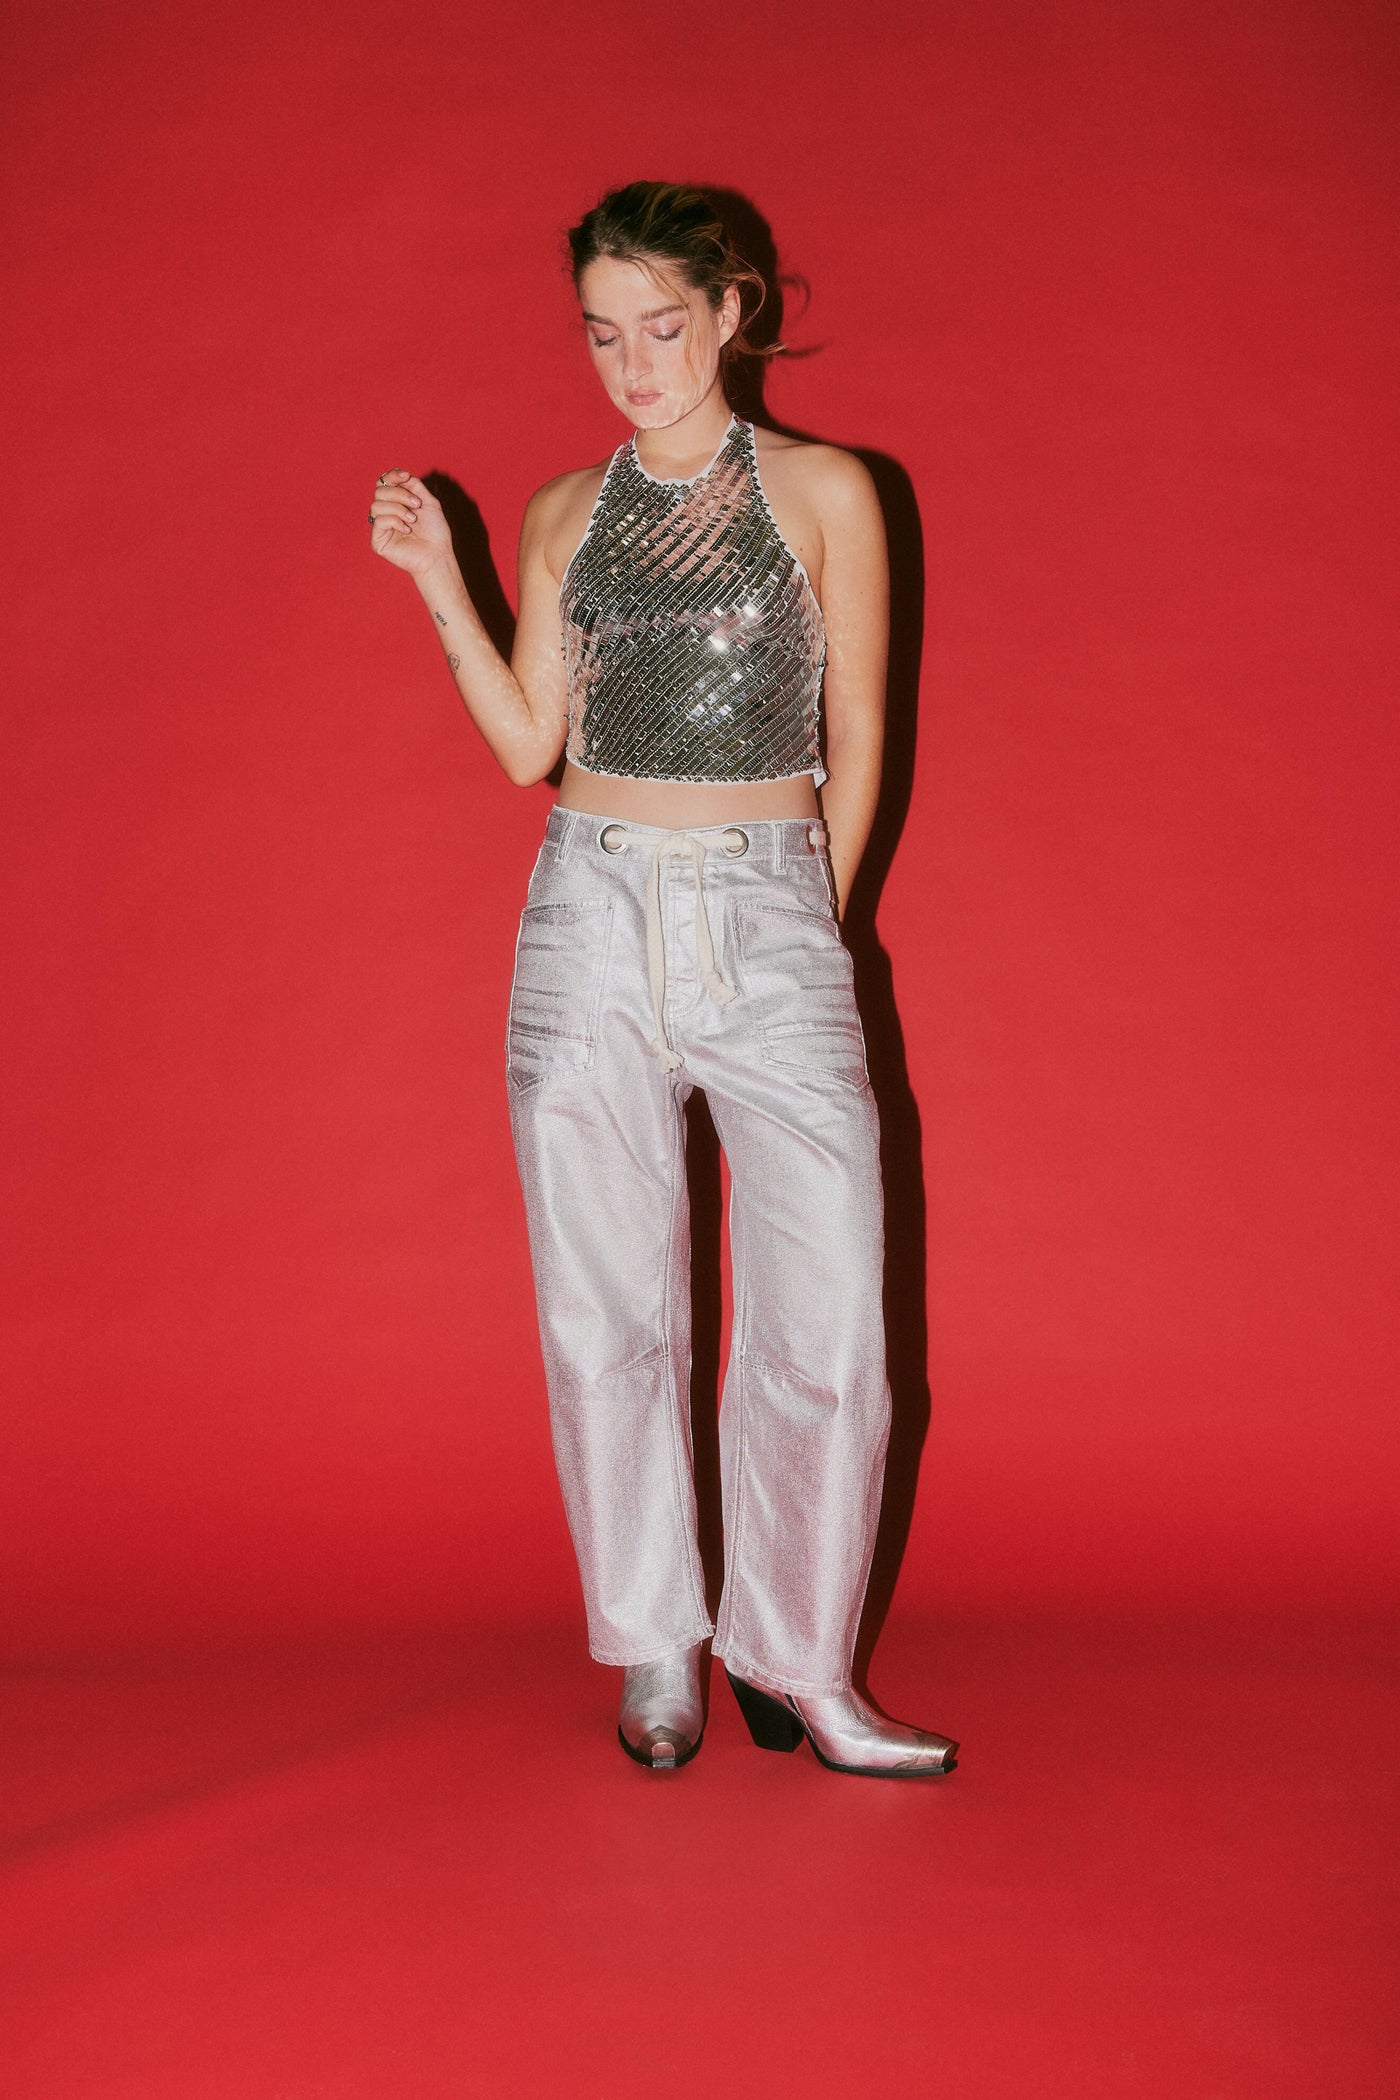 Free People DISCO FEVER CAMI Silver Top